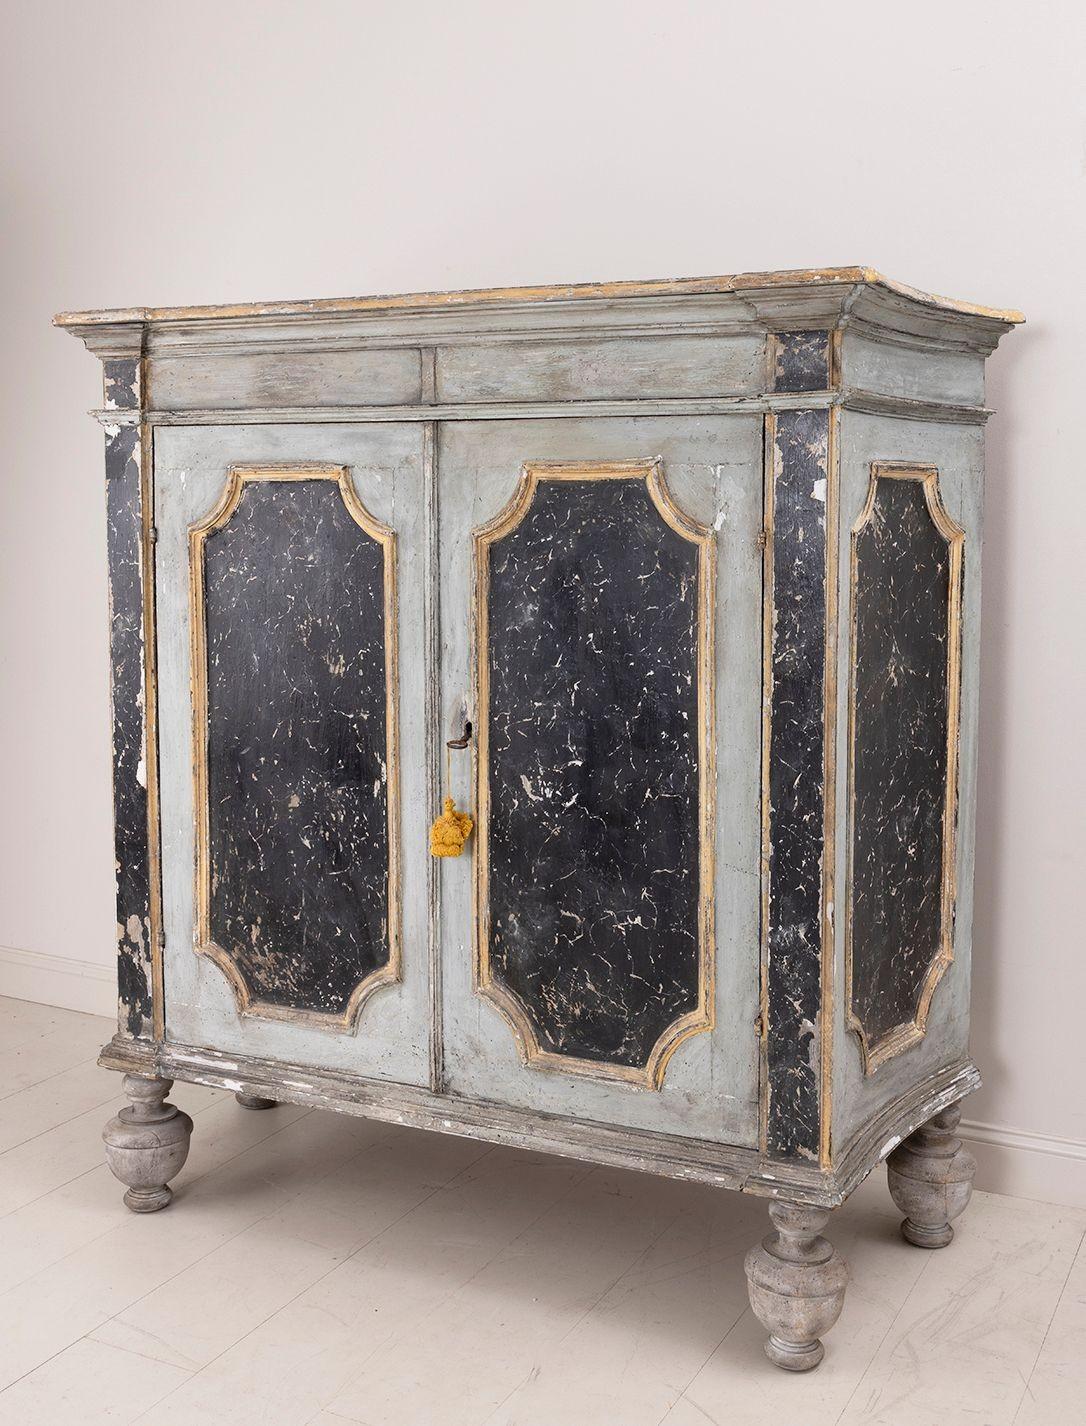 A late 18th century Italian armoire cabinet in the Baroque style with handsome, elongated bun feet. Inside the cabinet there is one fixed shelf. The lock is original. This is a beautiful, original piece with plenty of storage potential that will